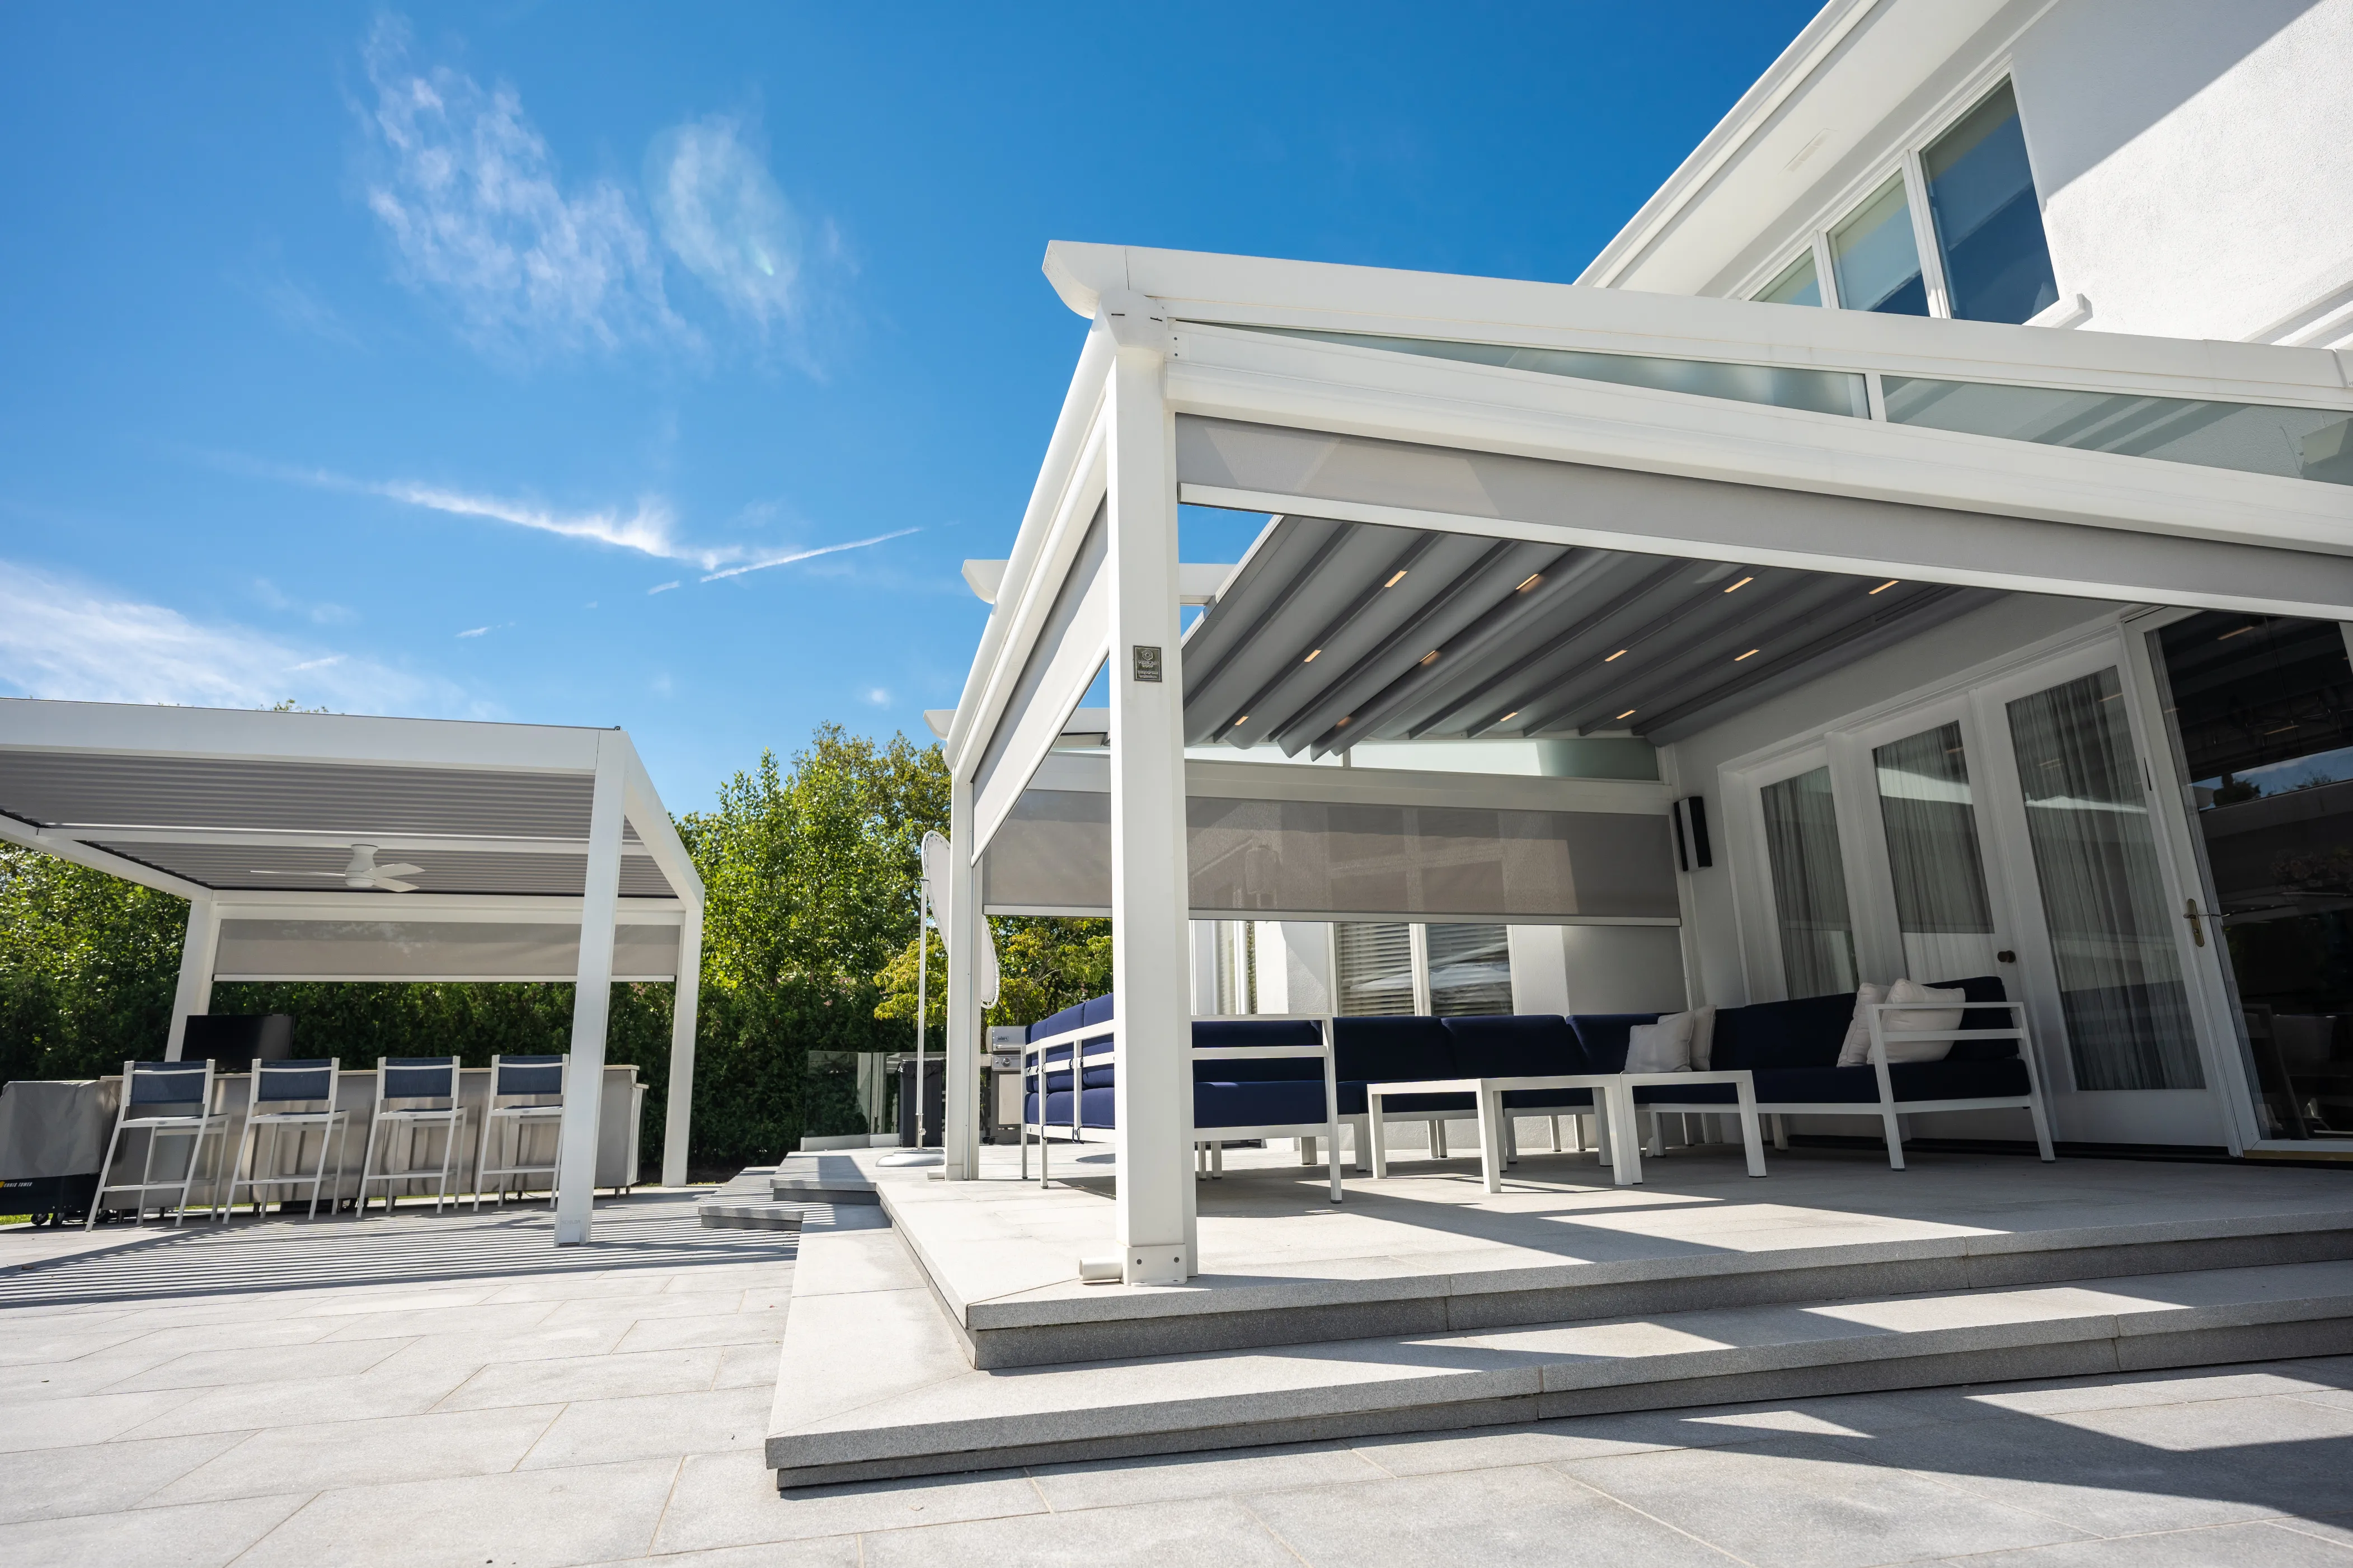 Featured image: A beautifully designed pergola in the backyard of a home, providing shaded outdoor space for relaxation and social gatherings - Read full post: The Ultimate Outdoor Living Experience: Adding a Motorized Pergola to Your Home